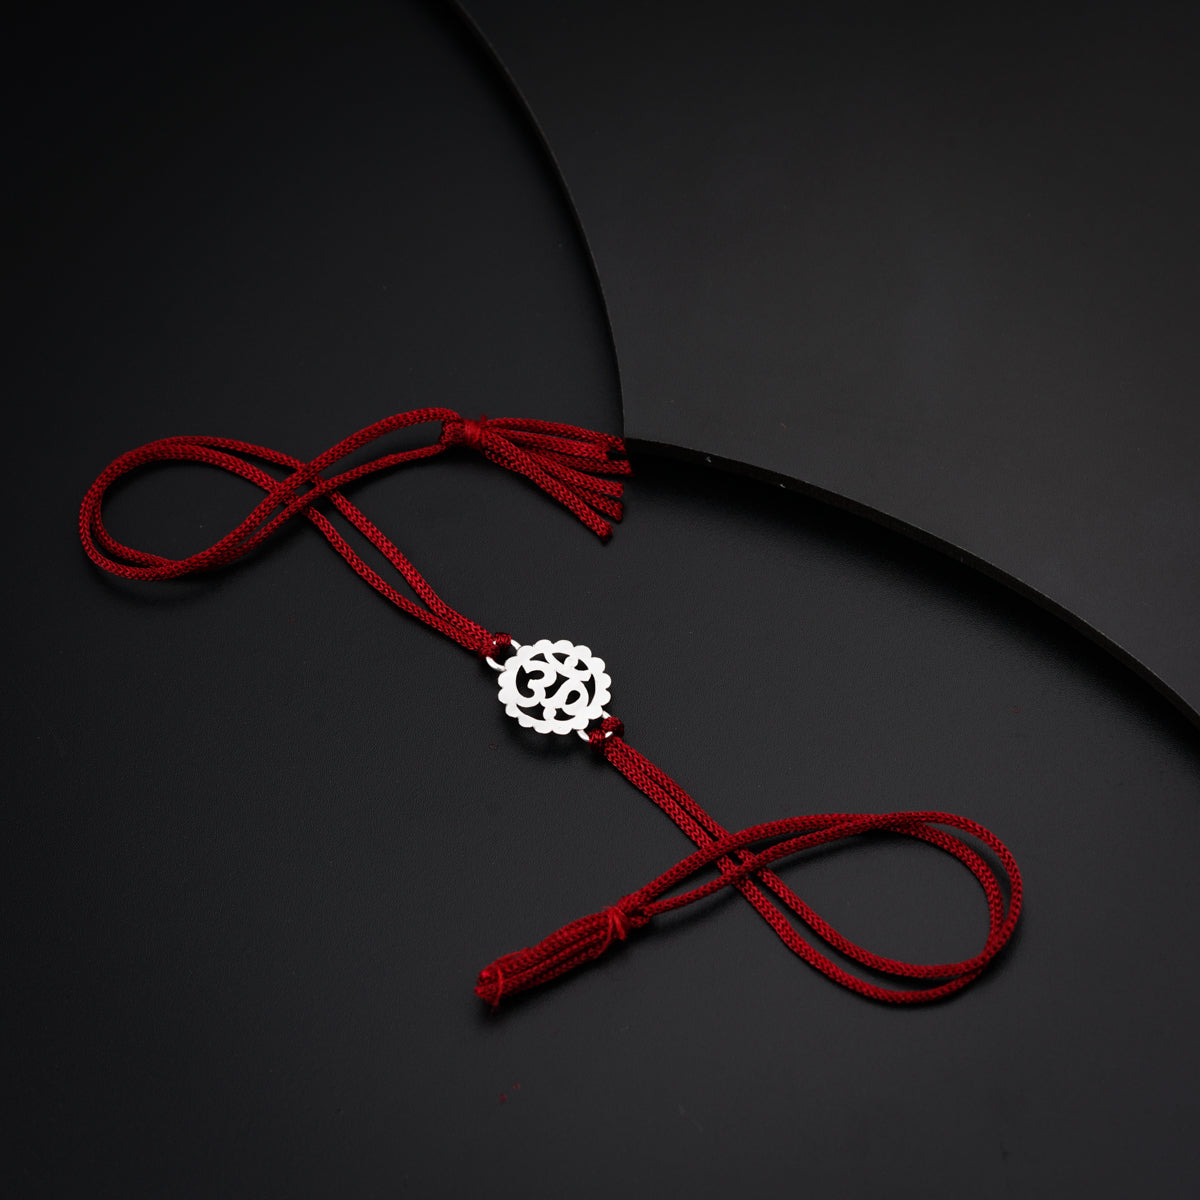 a red cord with a white bead on it